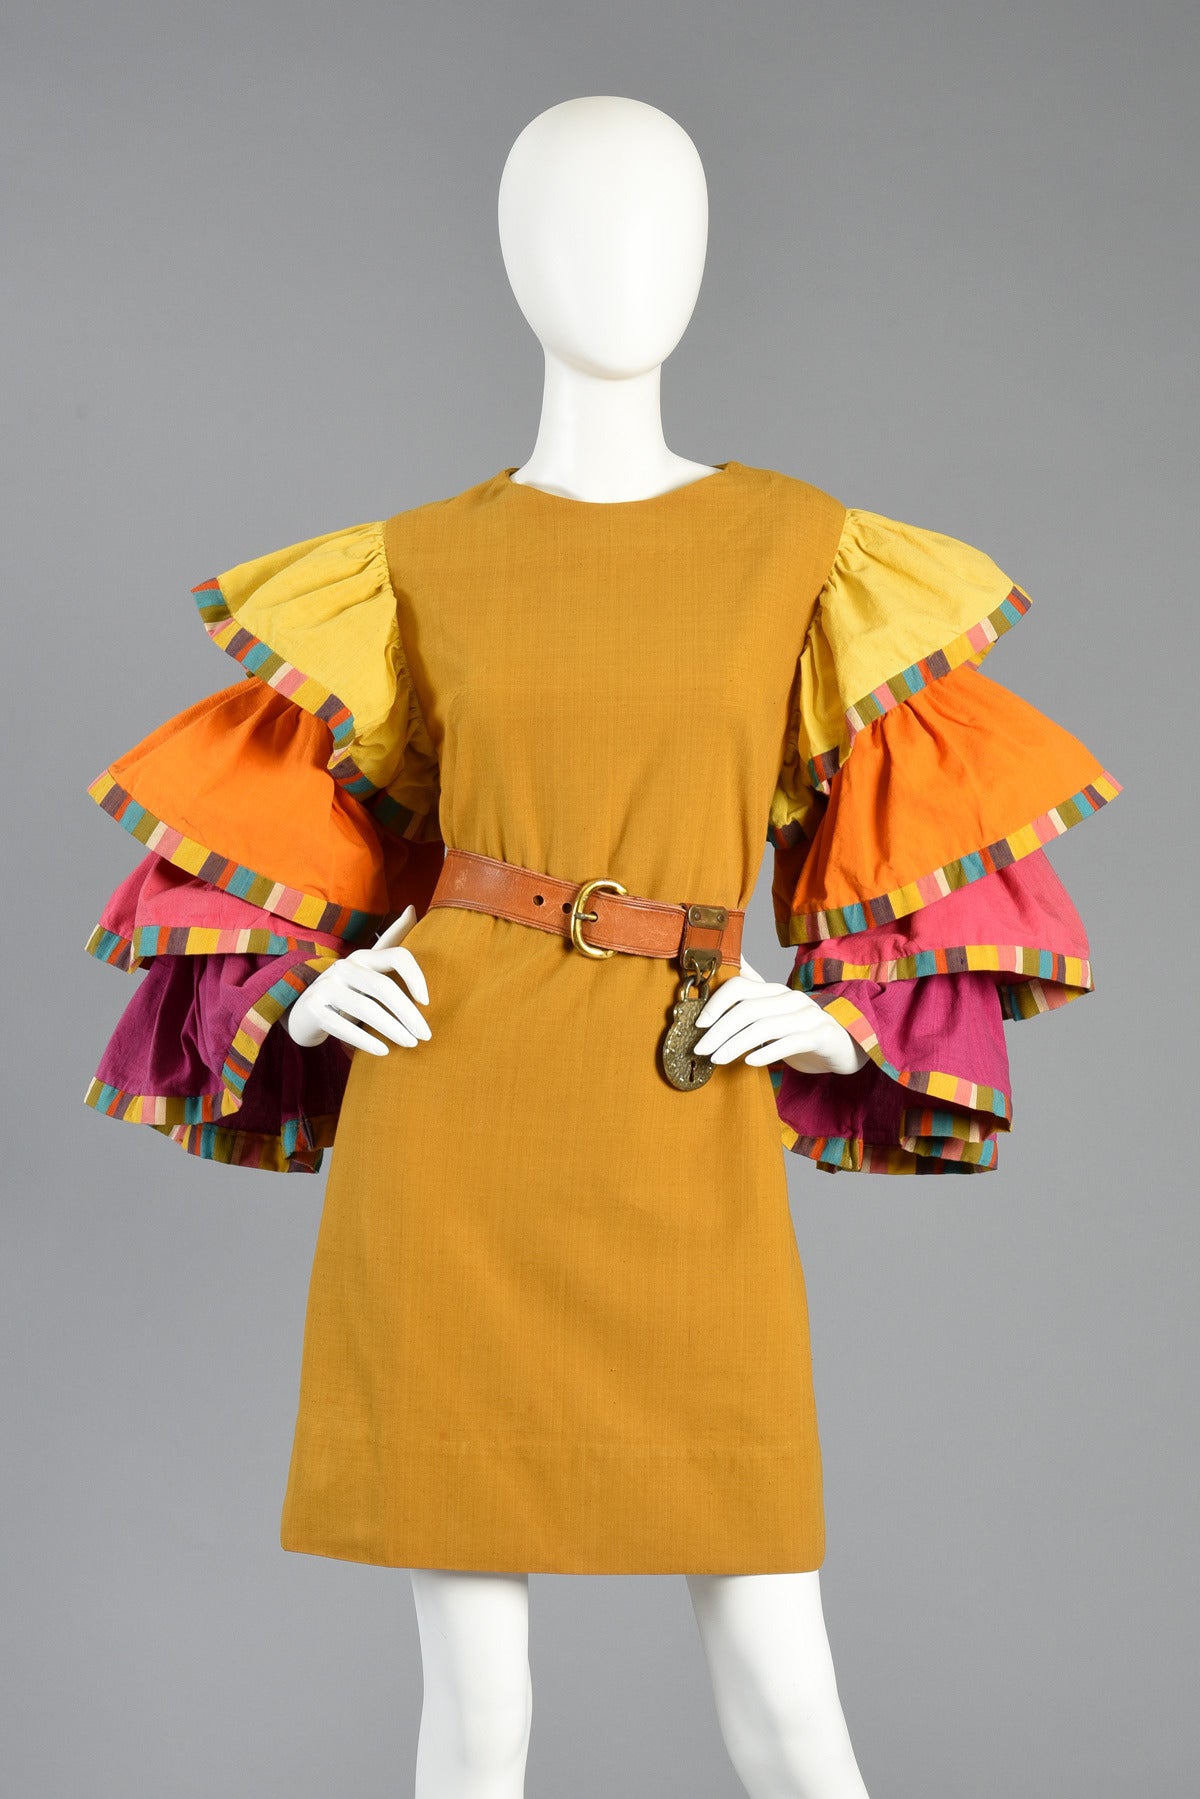 Island Resort 1960s Tiered Shift Dress In Excellent Condition In Yucca Valley, CA